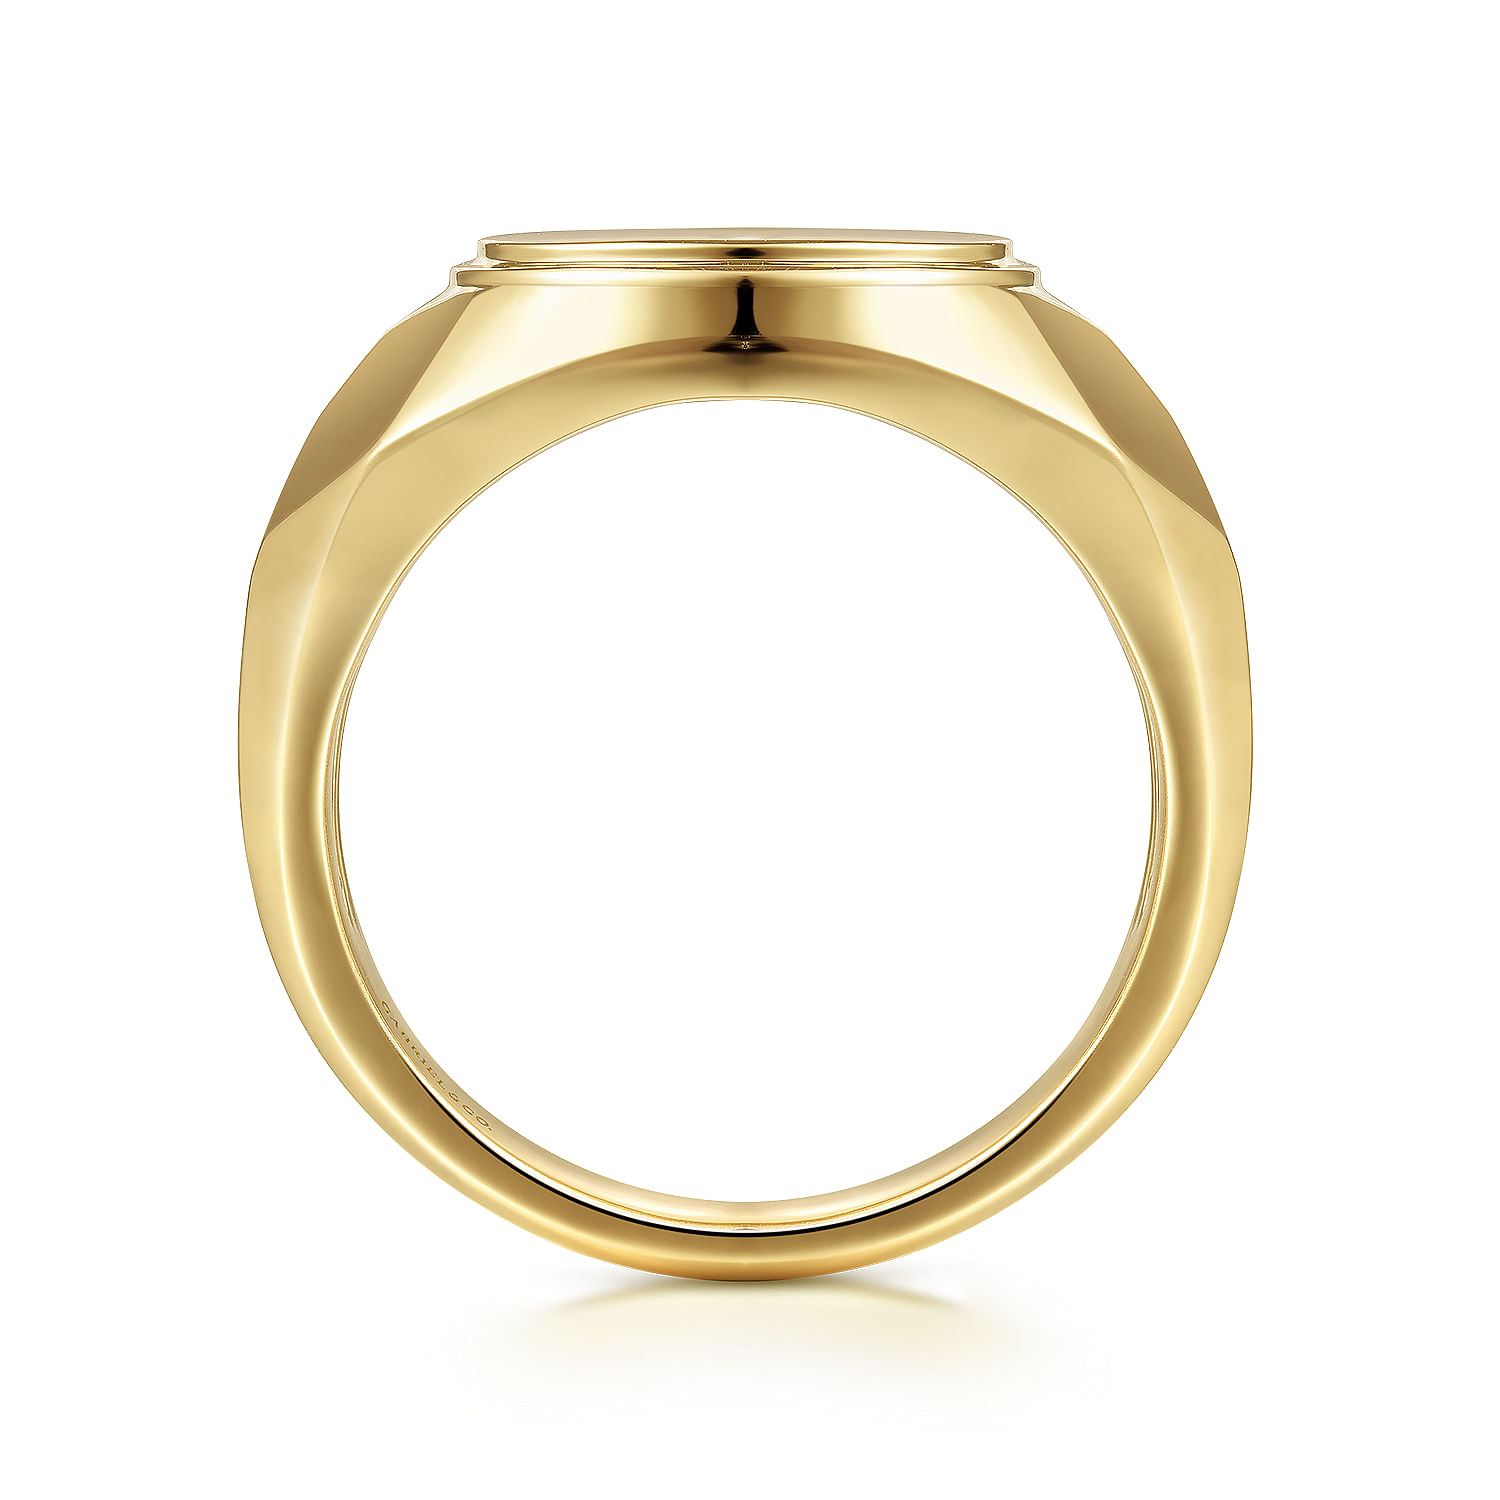 Wide 14K Yellow Gold Round Signet Ring in High Polished Finish